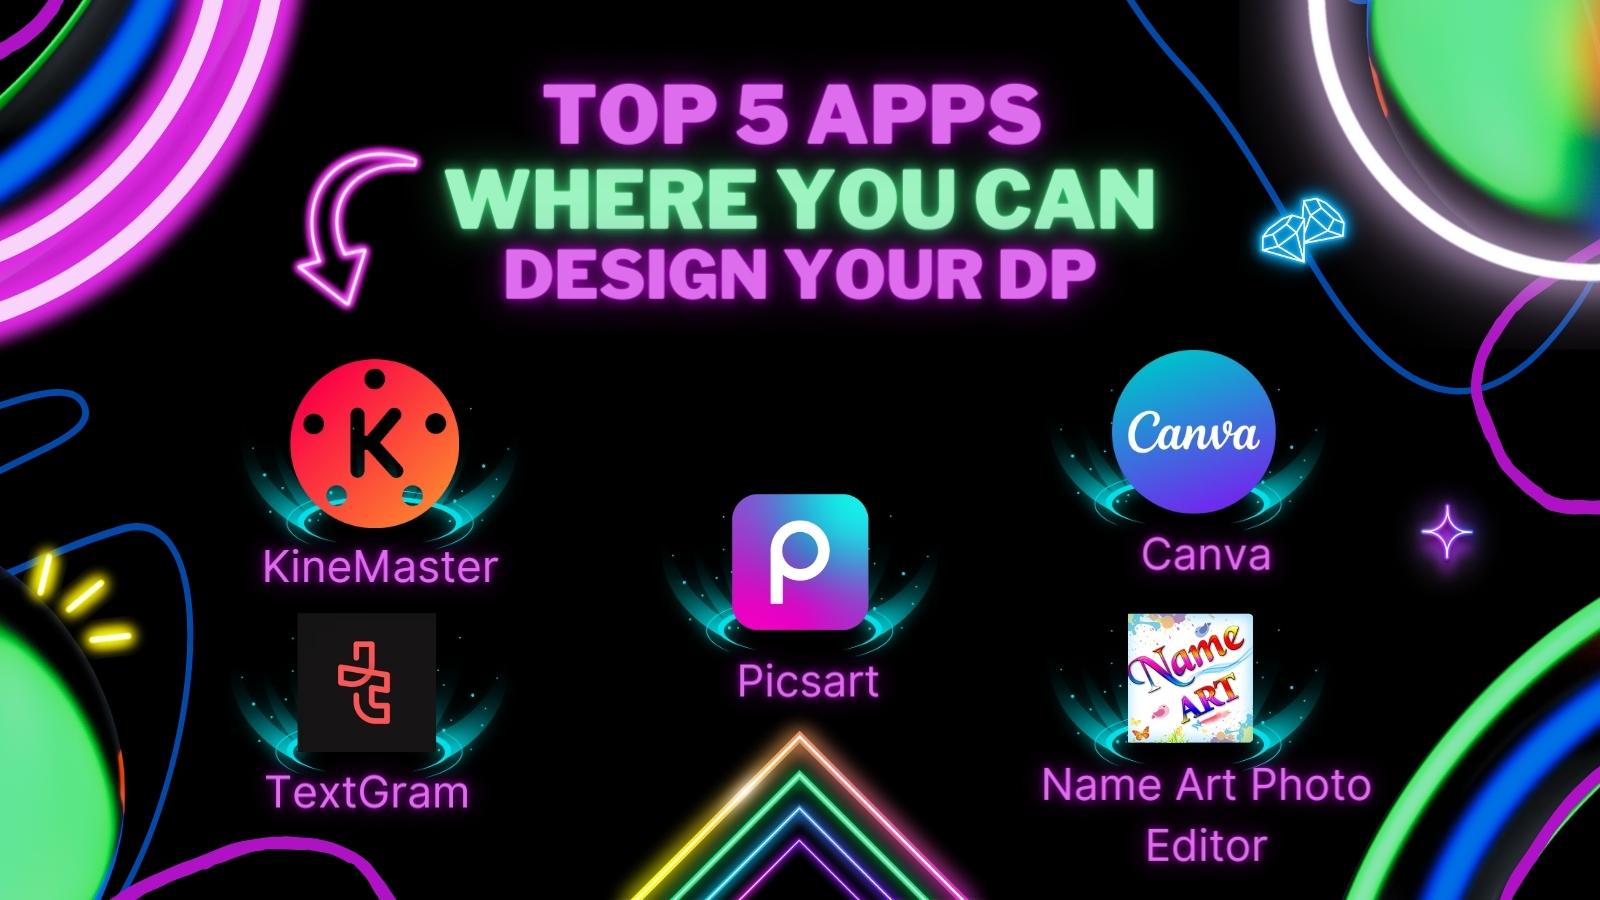 5 Apps To Design Your DP For Free To Download - A Name DP